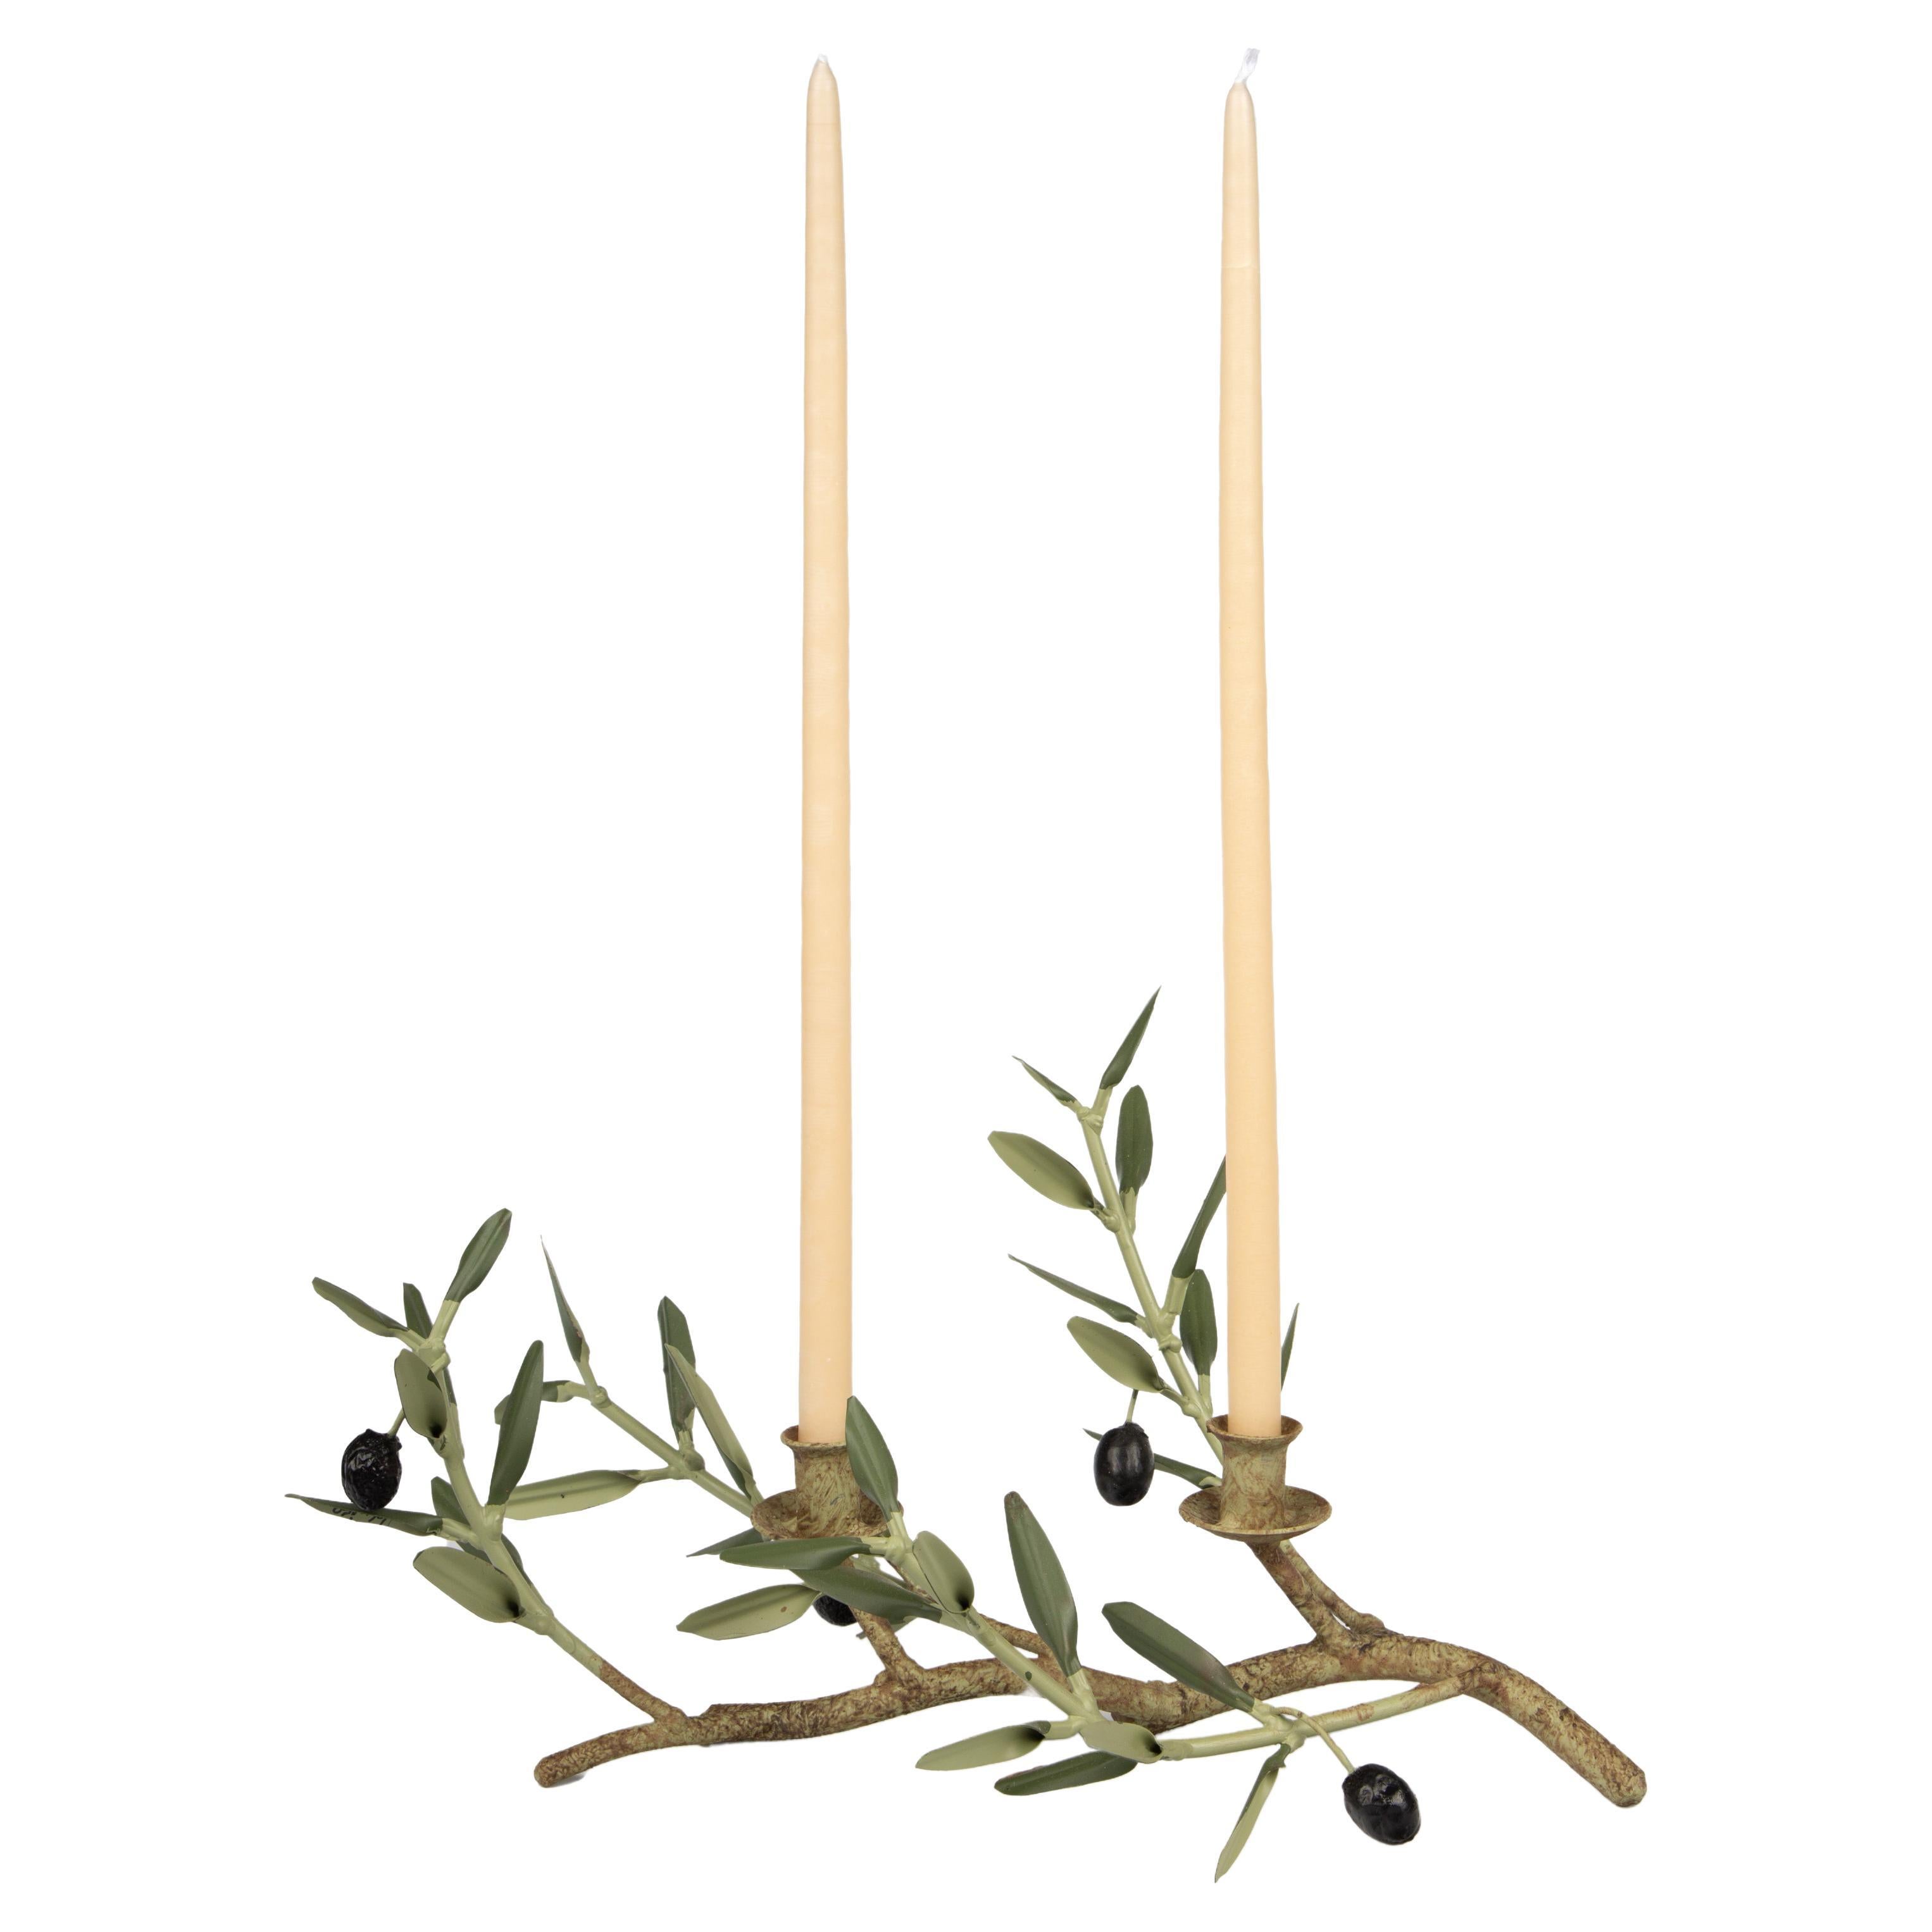 Handmade Olive Branch Candle Holder from Provence